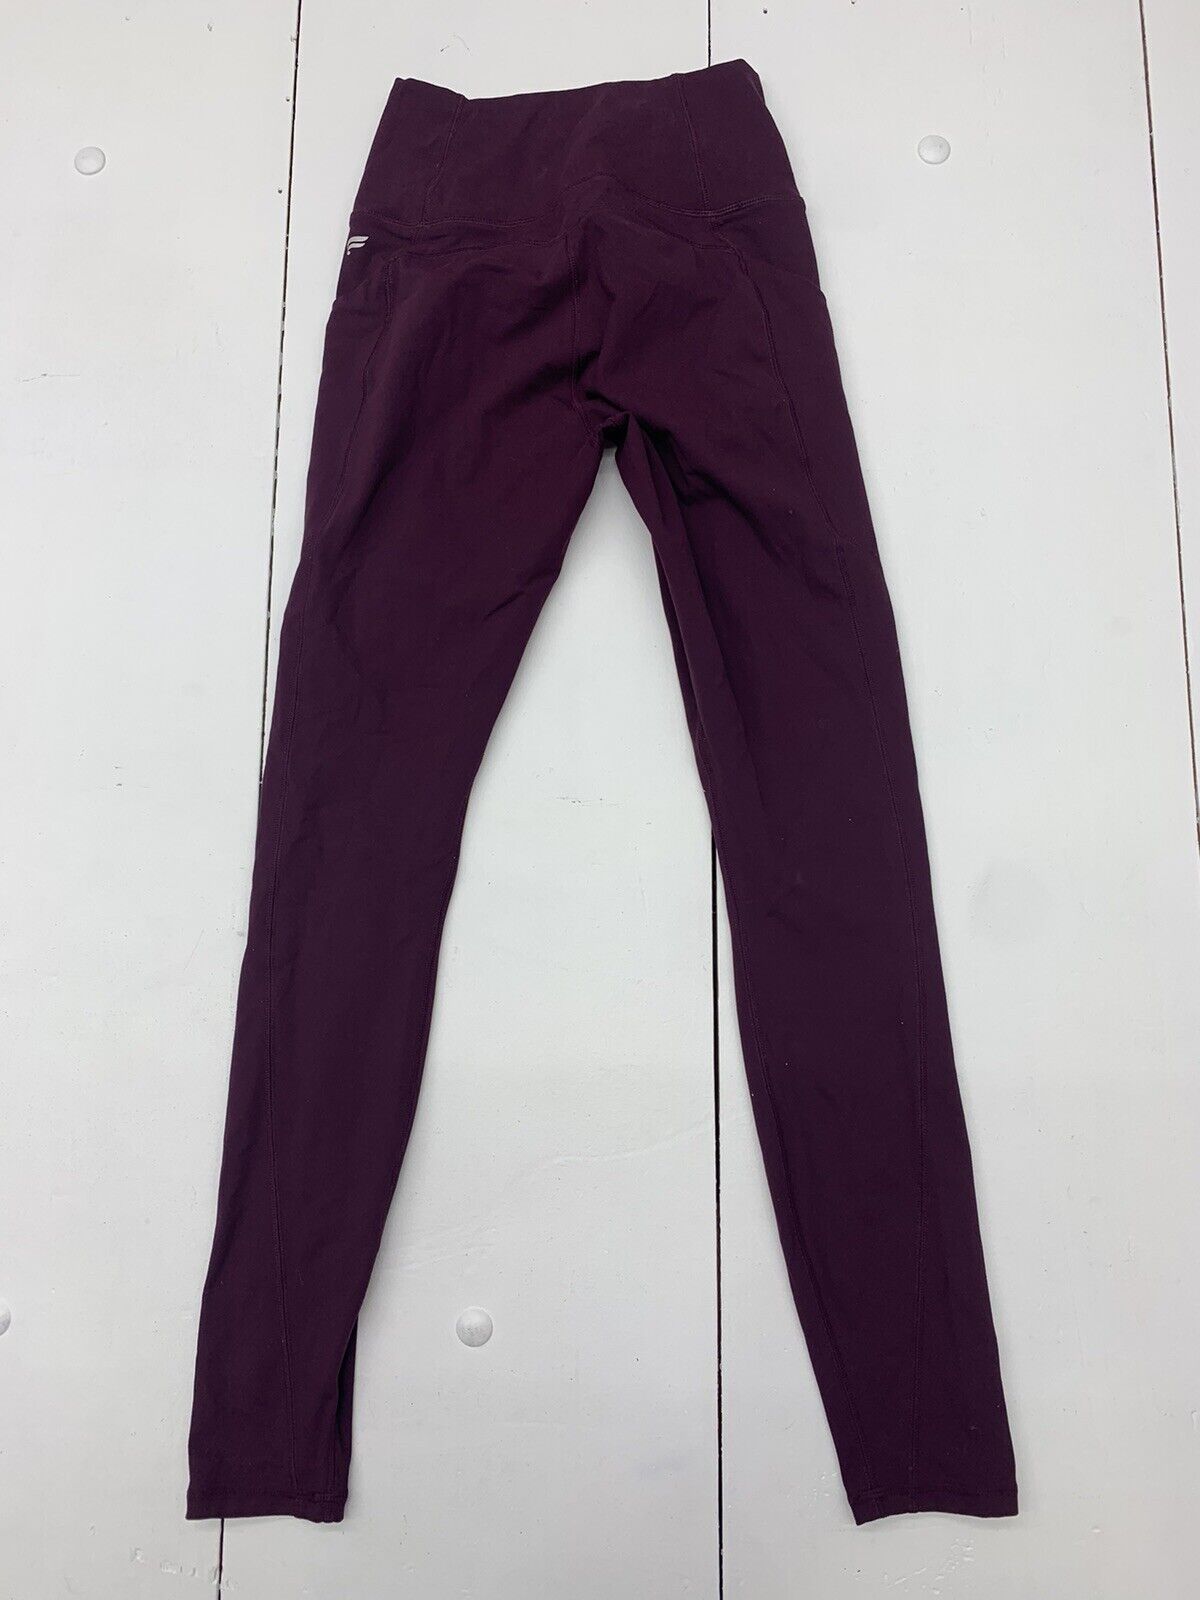 Fabletics Pure Luxe Womens Purple Leggings Size Small - beyond exchange